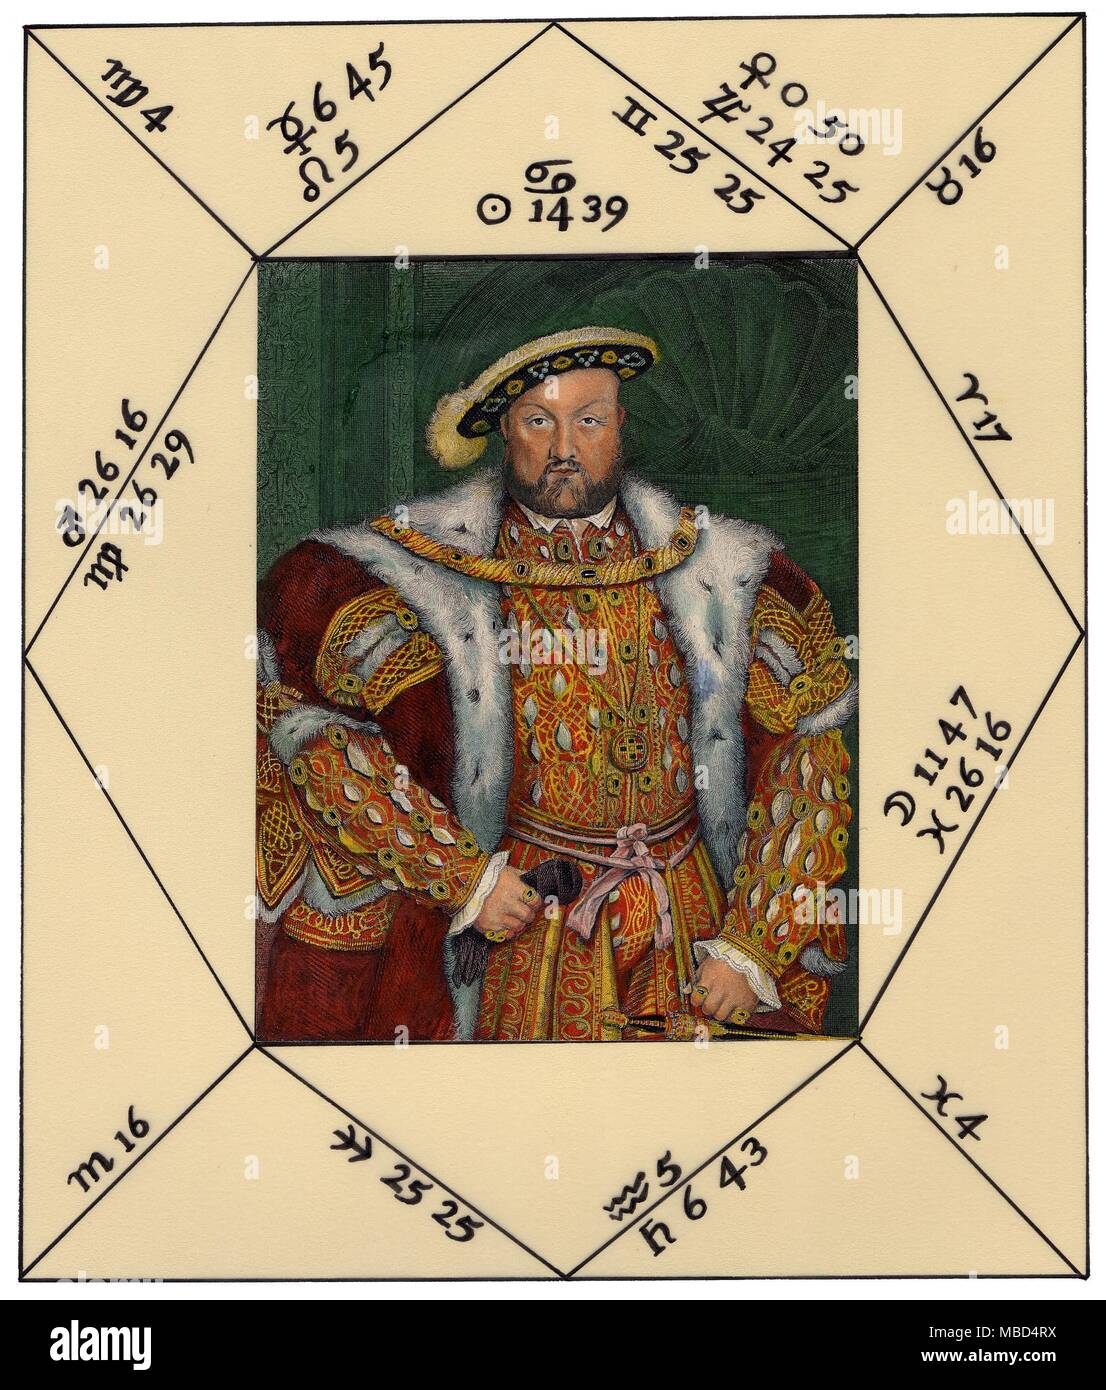 HOROSCOPES - HENRY VIII, KING OF ENGLAND Henry was born on 28 June 1491, in London. According to the chart cast by Ebenezer Sibly, A New and Complete Illustration of the Occult Sciences (1790), Henry was born at 10:40 am. As one of the most significant historical figures of the period, it is inevitable that a large number of charts relating to Henry's birth were published, both during his life and in the century that followed: it is no surprise that Henry was himself a keen star-gazer, with an interest in astrology. Some of the more interesting horoscopes are those in unpublished manusc Stock Photo